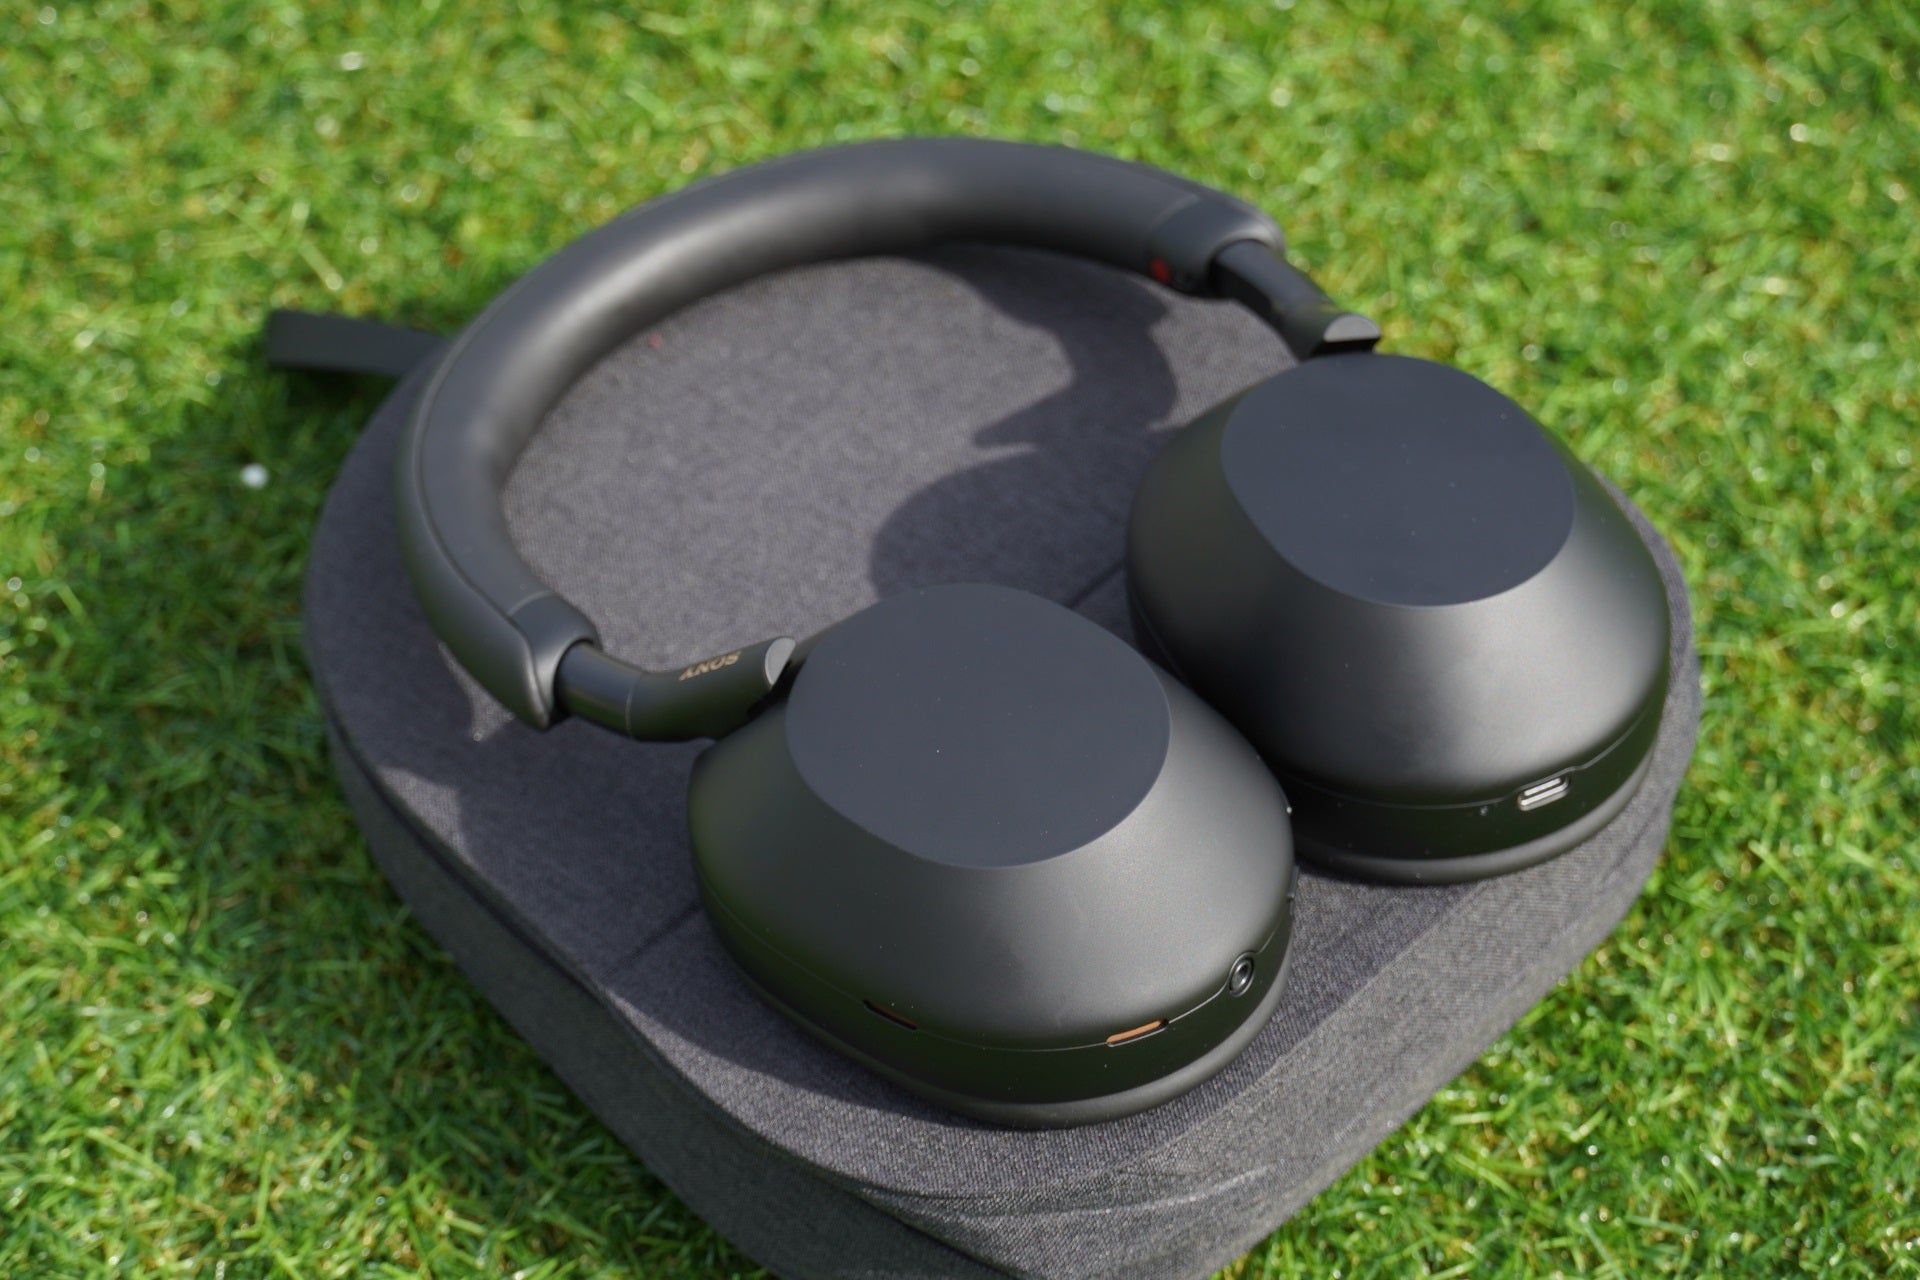 Sony’s WH-1000XM5 headphones are now an absolute steal